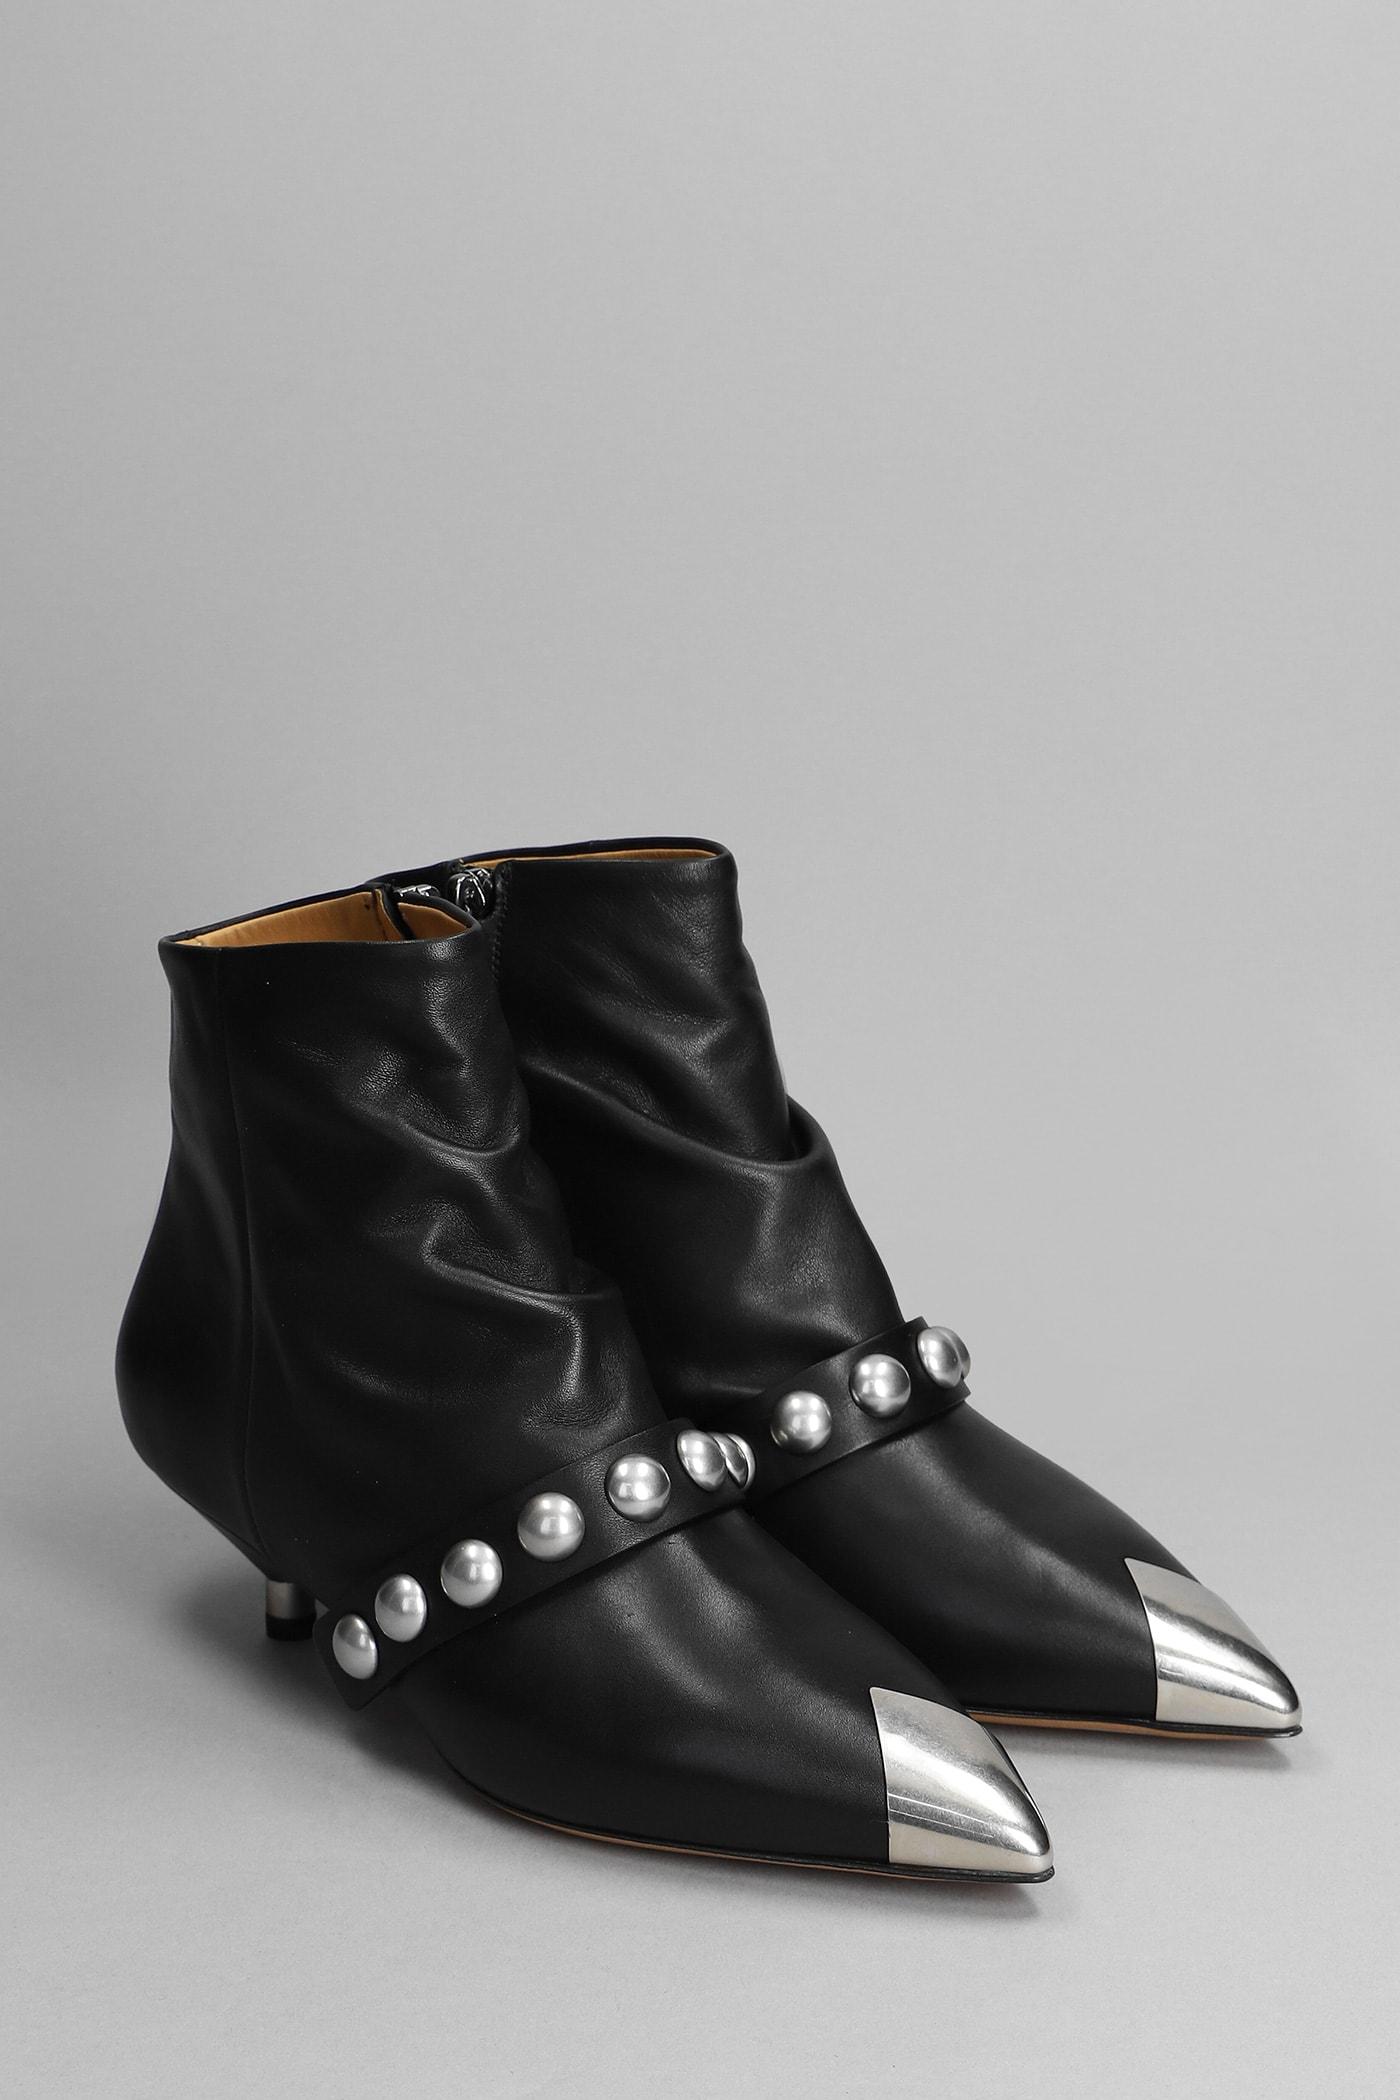 Formode Opmuntring møl Isabel Marant Donatee Low Heels Ankle Boots In Black Leather | Lyst